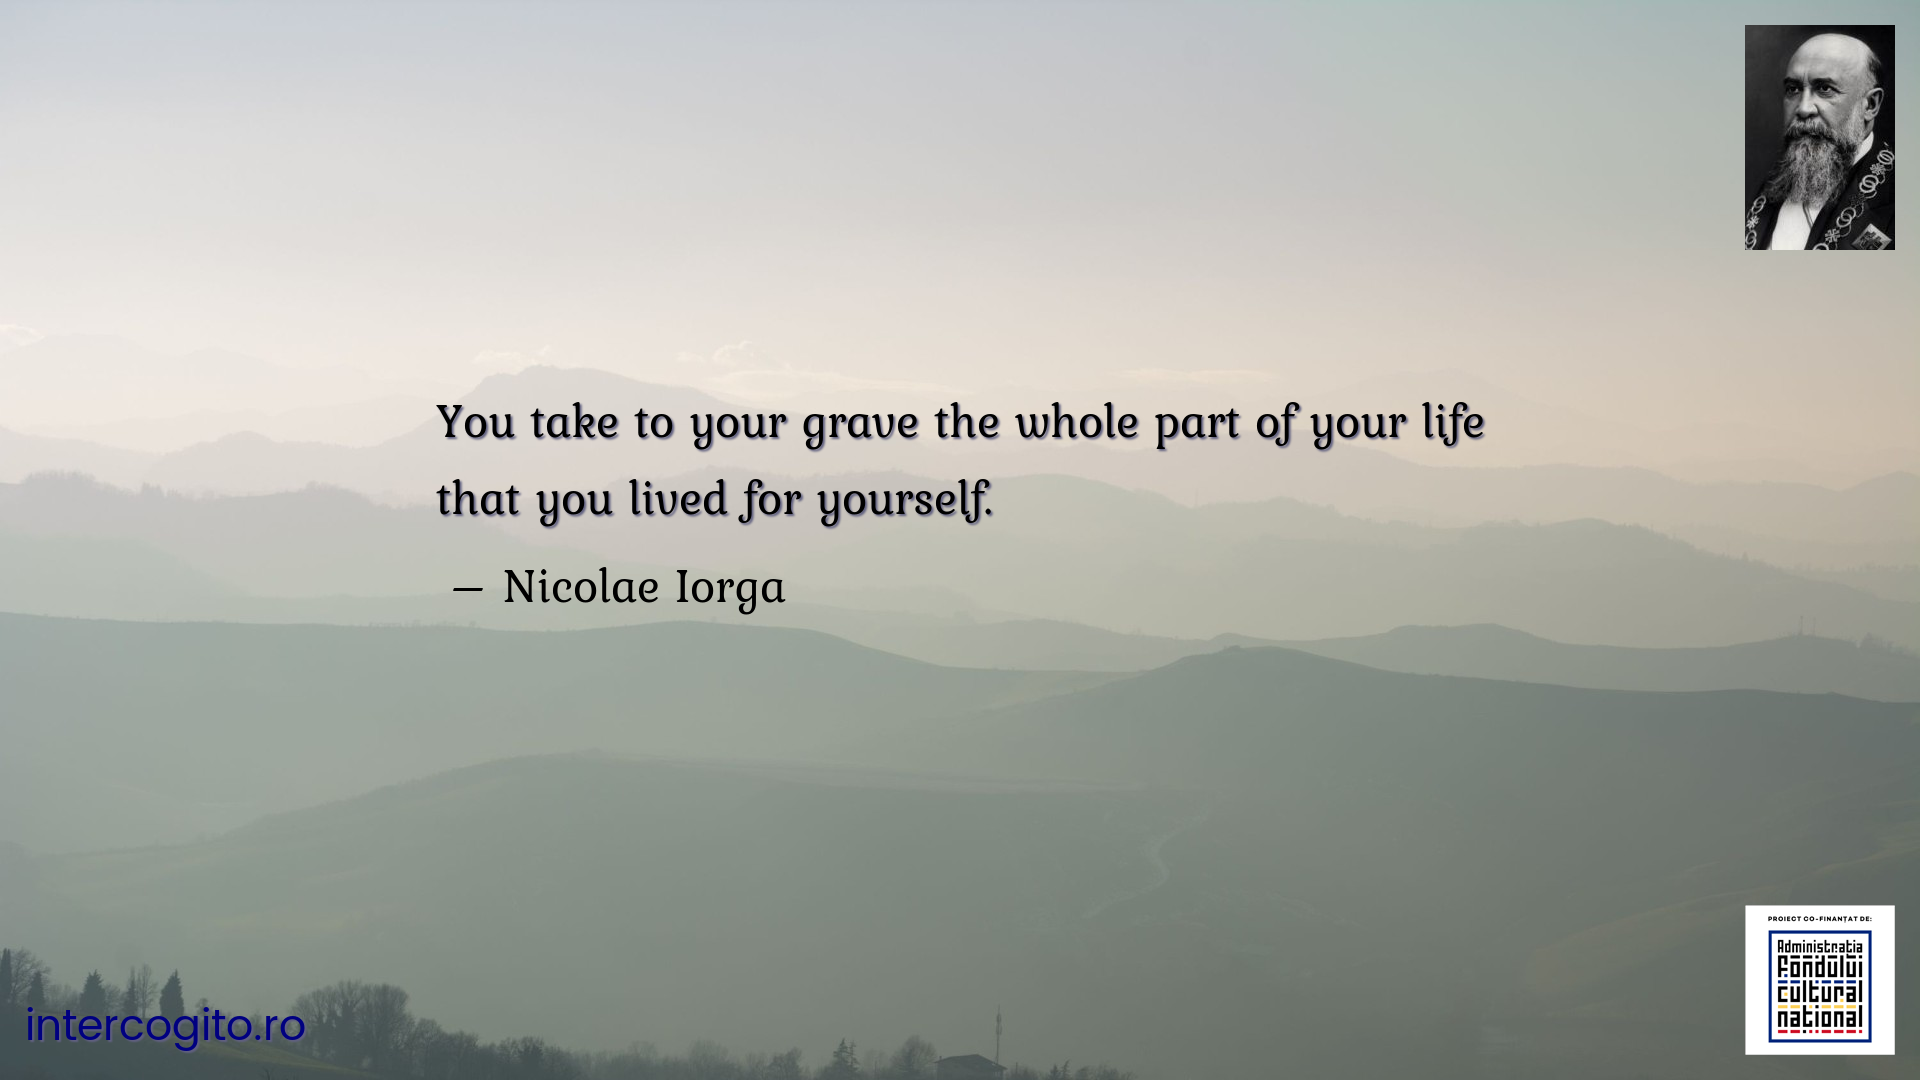 You take to your grave the whole part of your life that you lived for yourself.